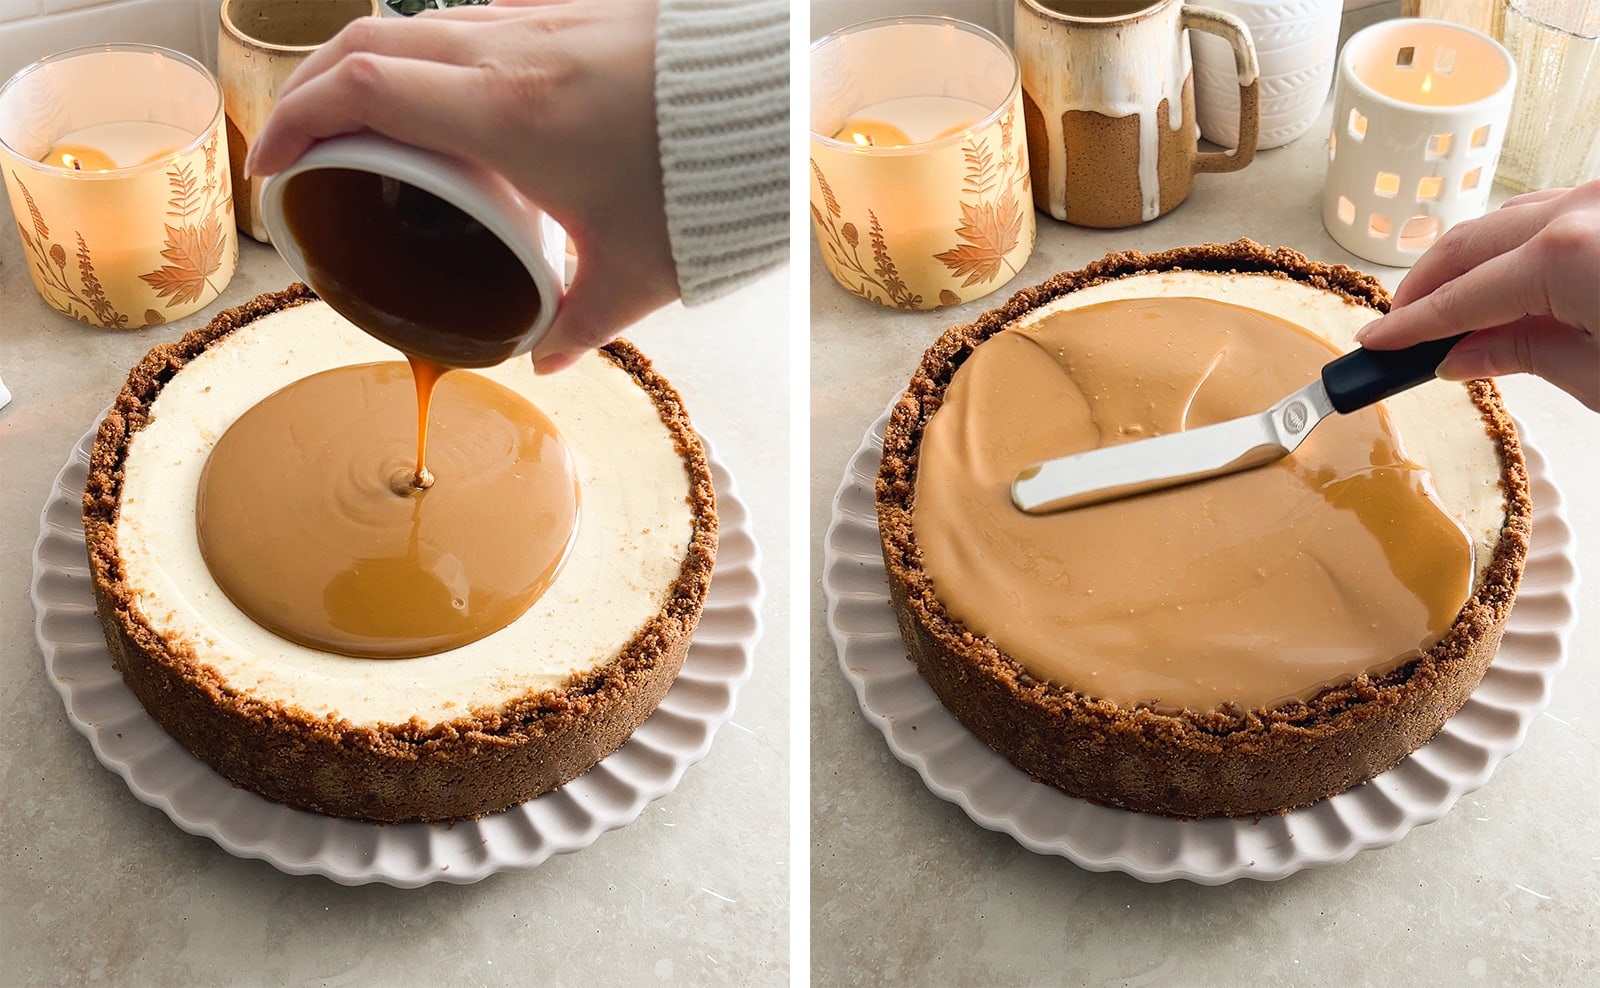 Left to right: pouring biscoff spread on top of a baked cheesecake, spreading biscoff spread on top of cheesecake.